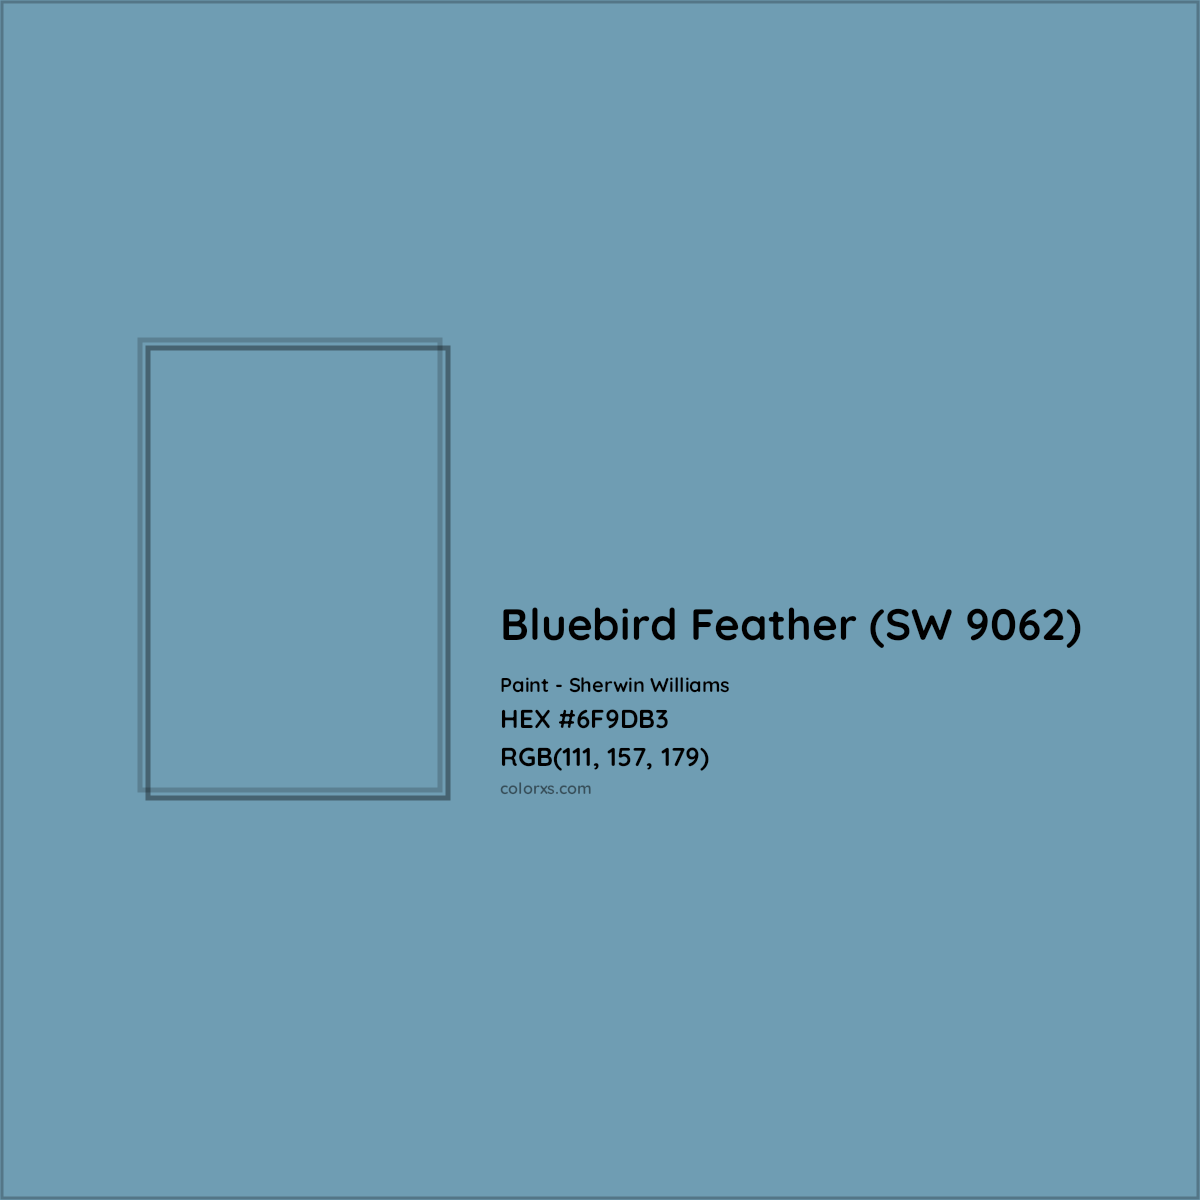 HEX #6F9DB3 Bluebird Feather (SW 9062) Paint Sherwin Williams - Color Code